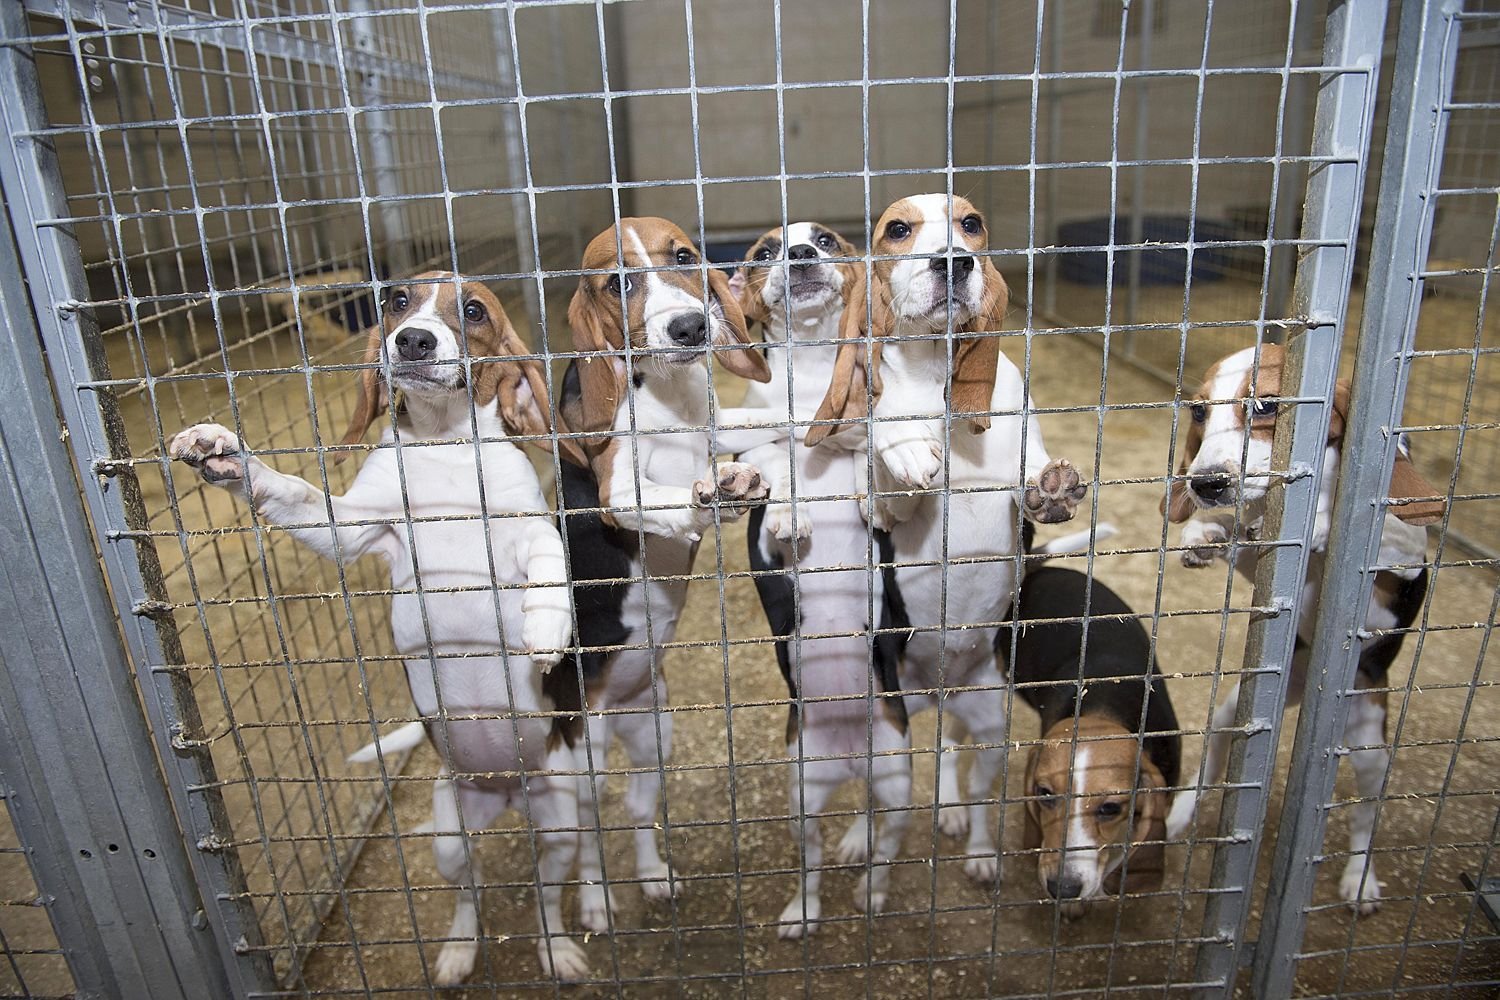 Beagles Are The Most Used Dogs For Animal Testing. The Reason Is